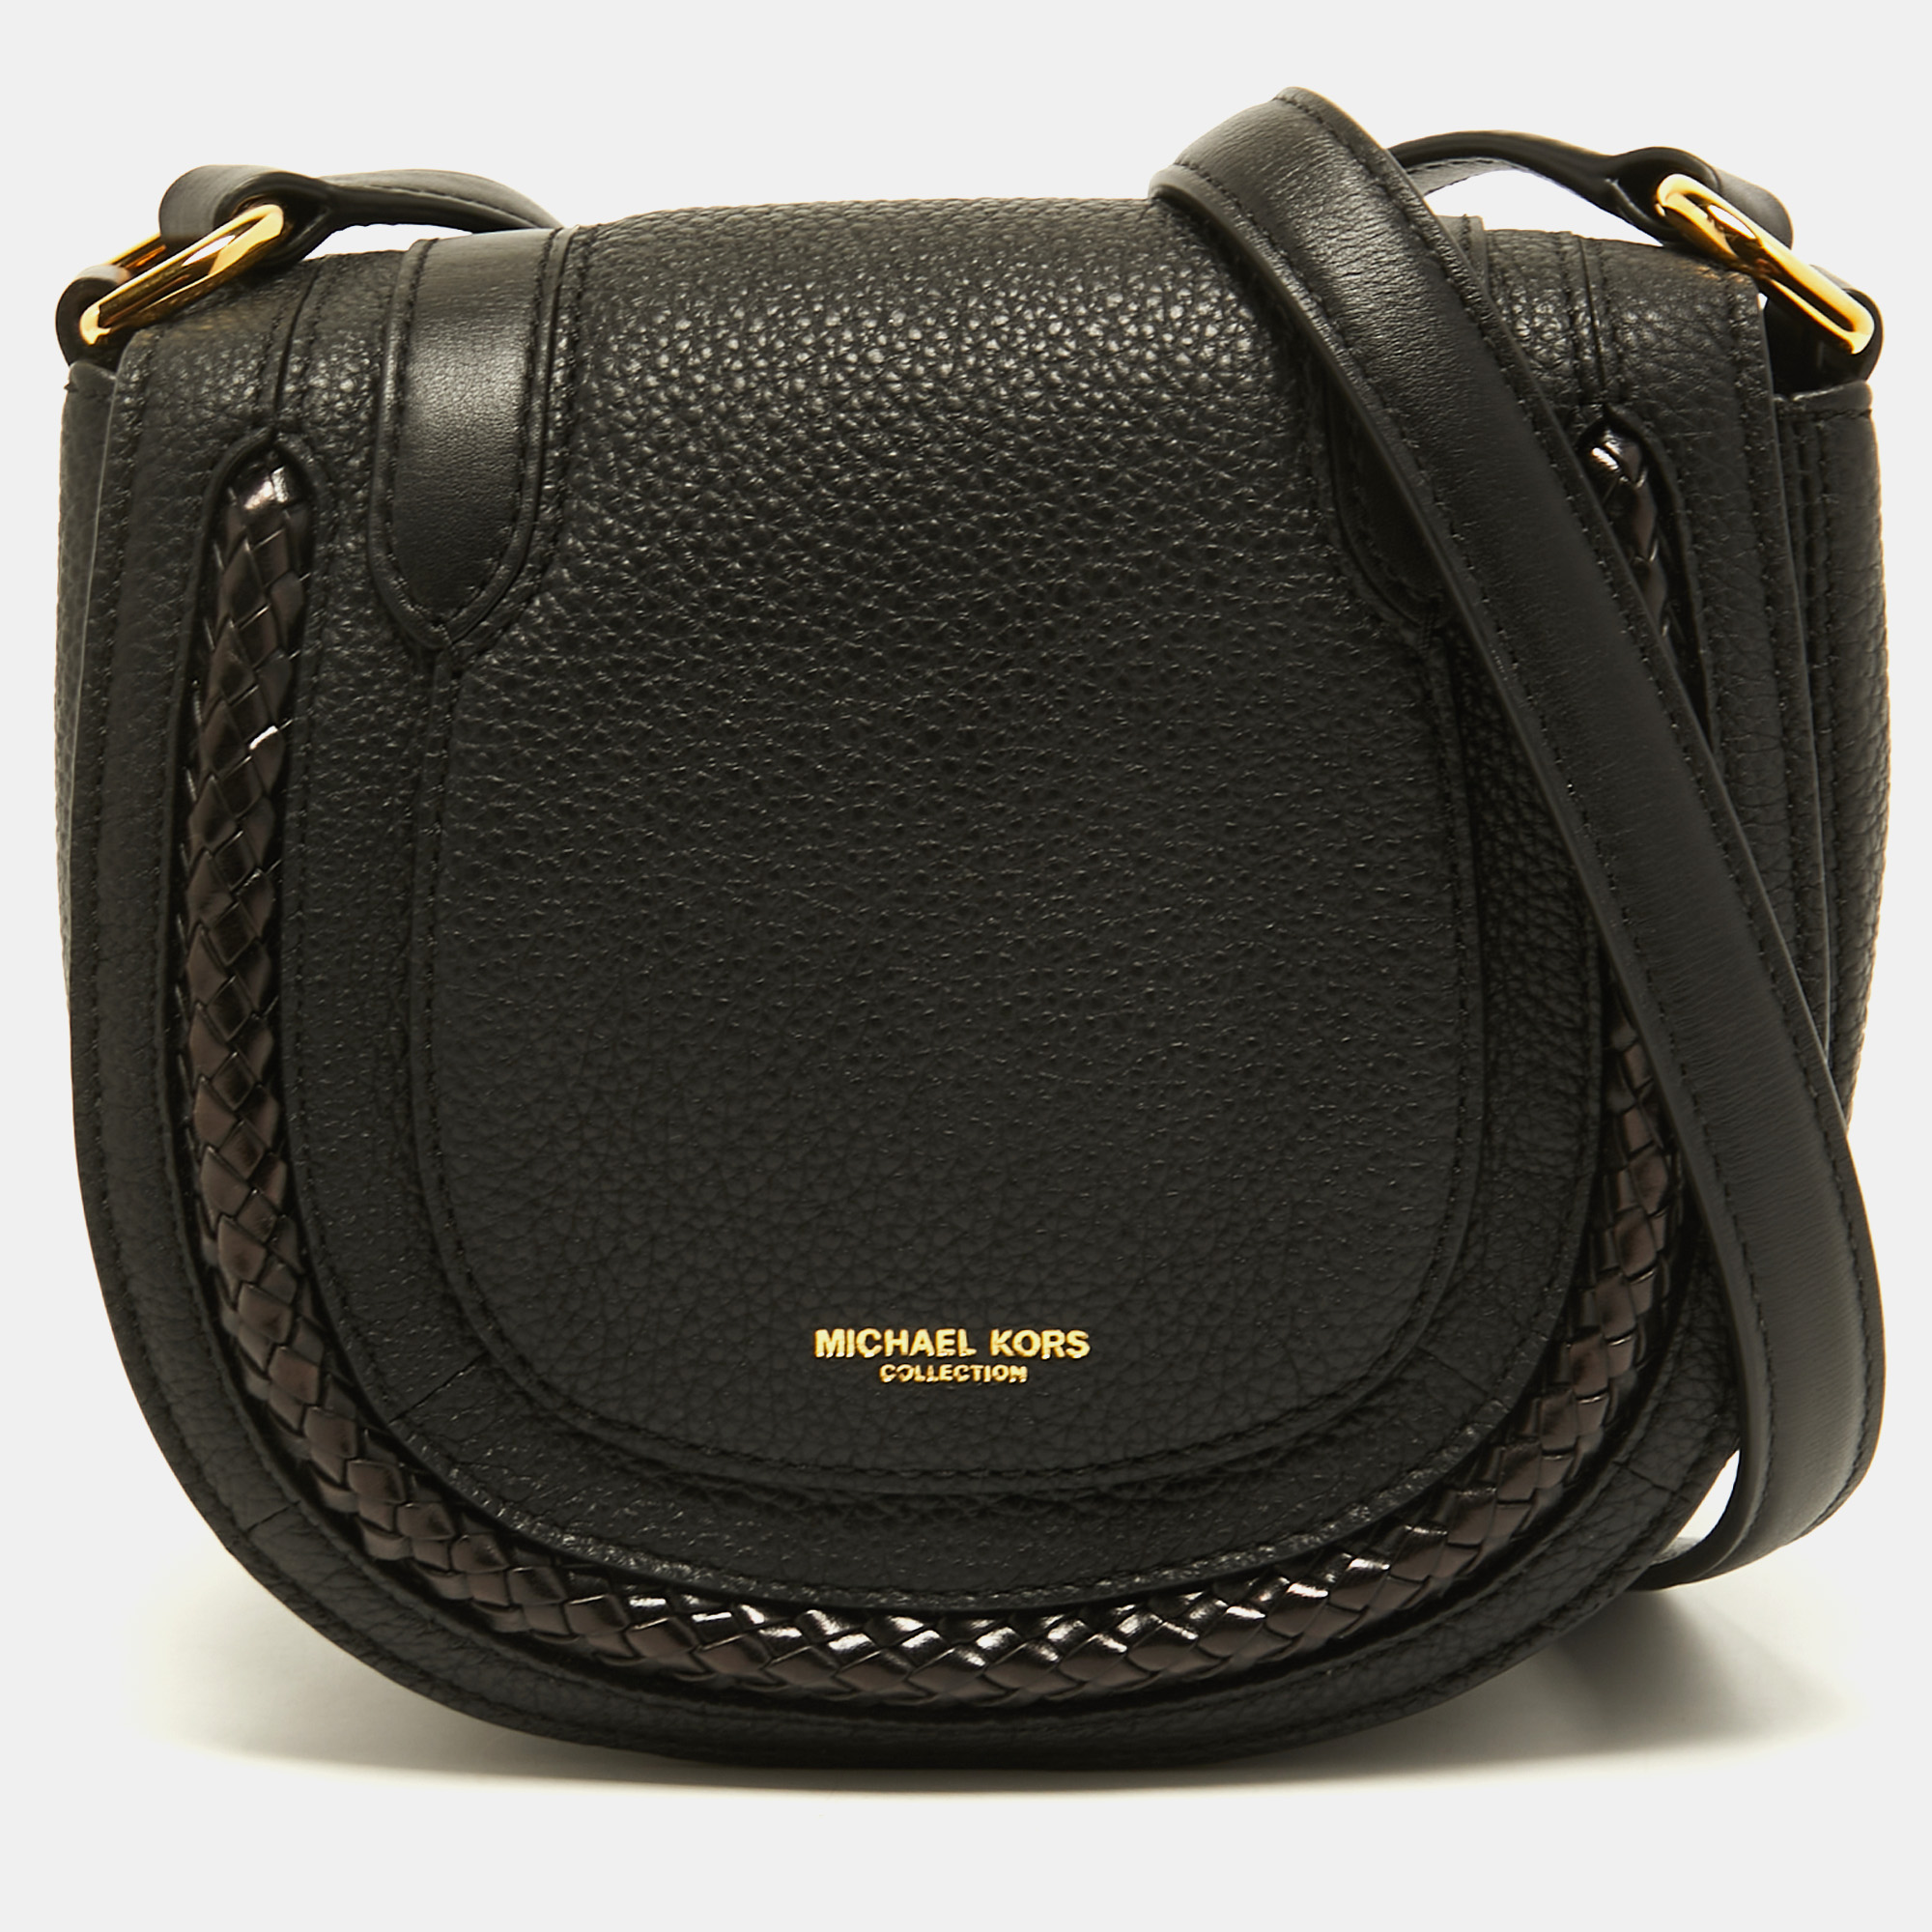 Pre-owned Michael Kors Collection Black Leather Saddle Crossbody Bag